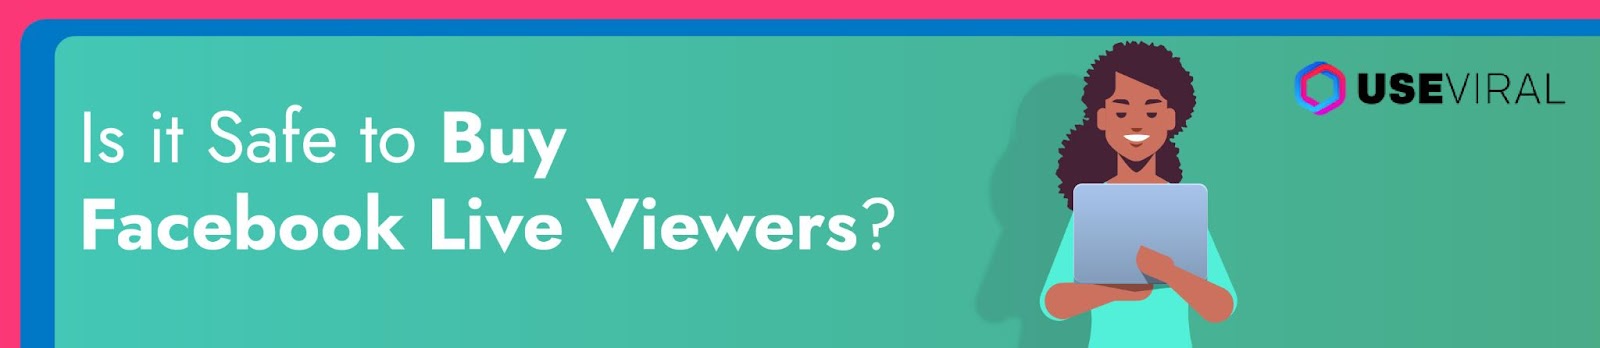 Is it Safe to Buy Facebook Live Viewers?